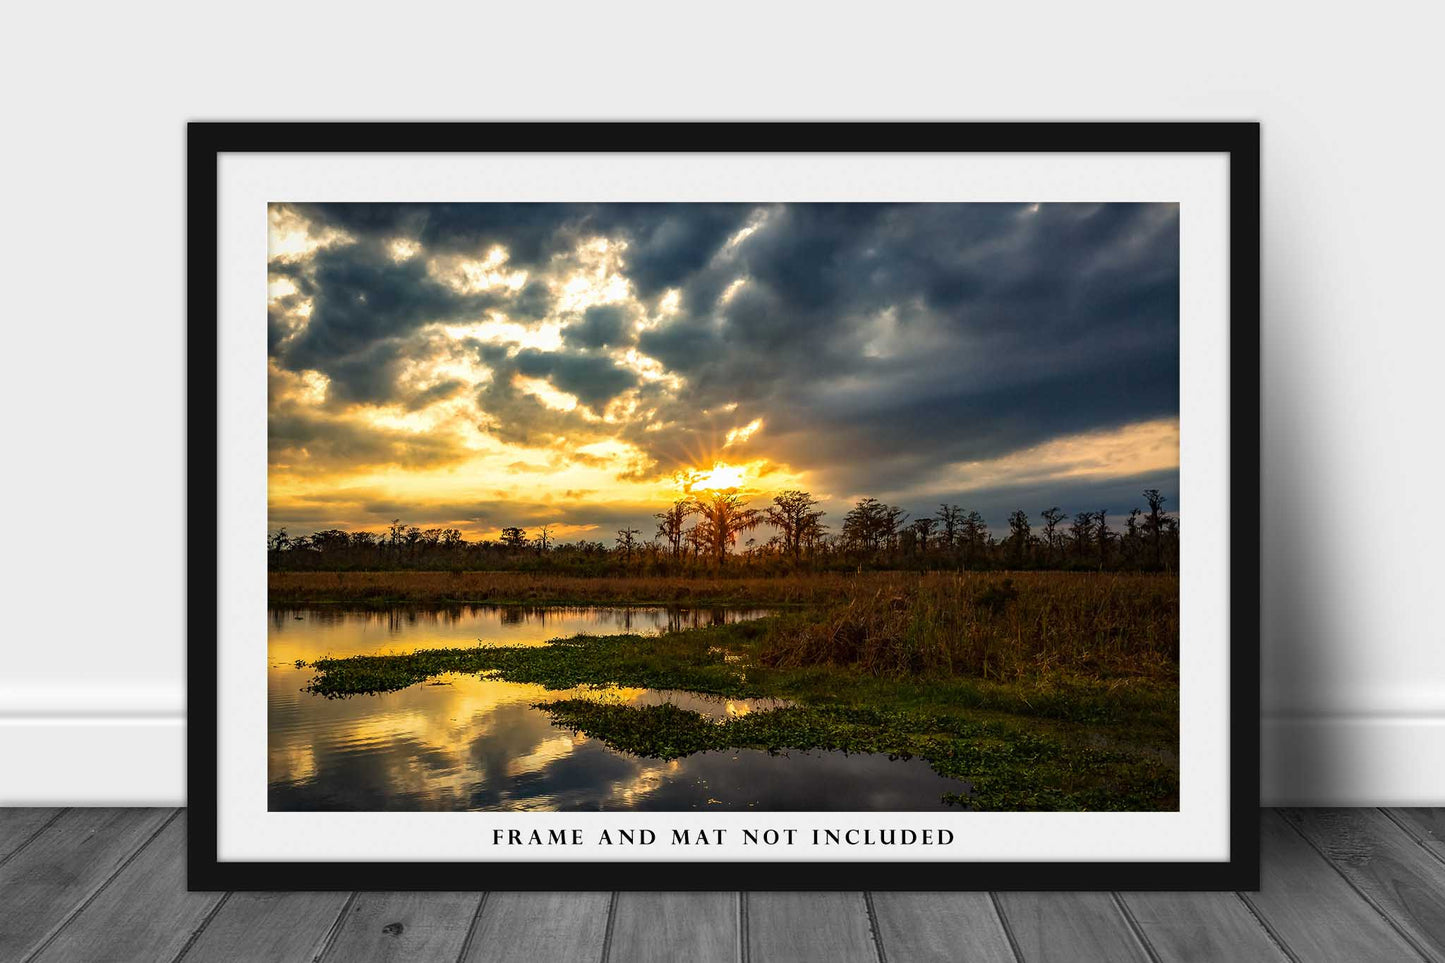 Southern Landscape Photography Art Print - Picture of Cypress Trees on Horizon and Winter Sunset on Louisiana Bayou Wetlands Decor